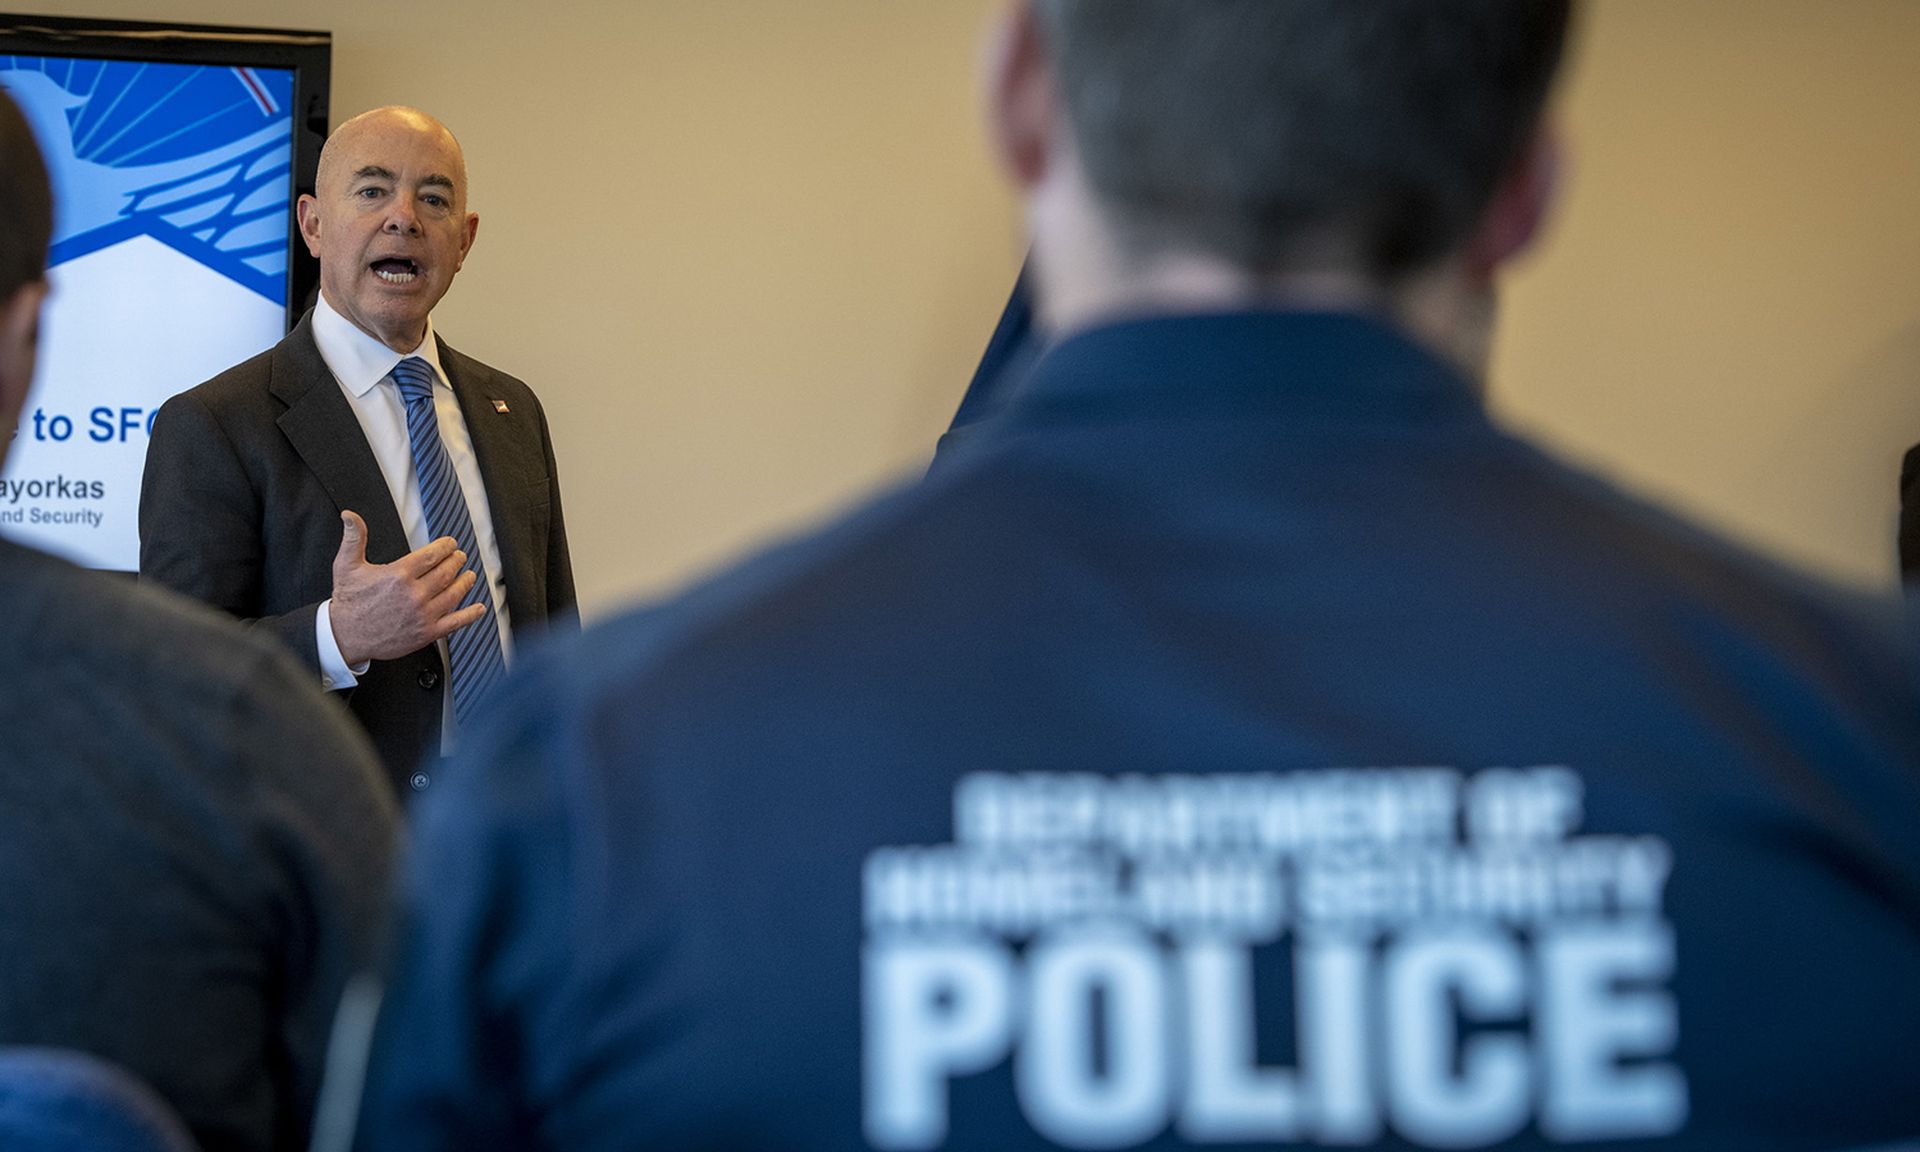 Homeland Security Secretary Alejandro Mayorkas meets with members of the Federal Air Marshall Service on March 23, 2022, in San Francisco. (Zachary Hupp/DHS)